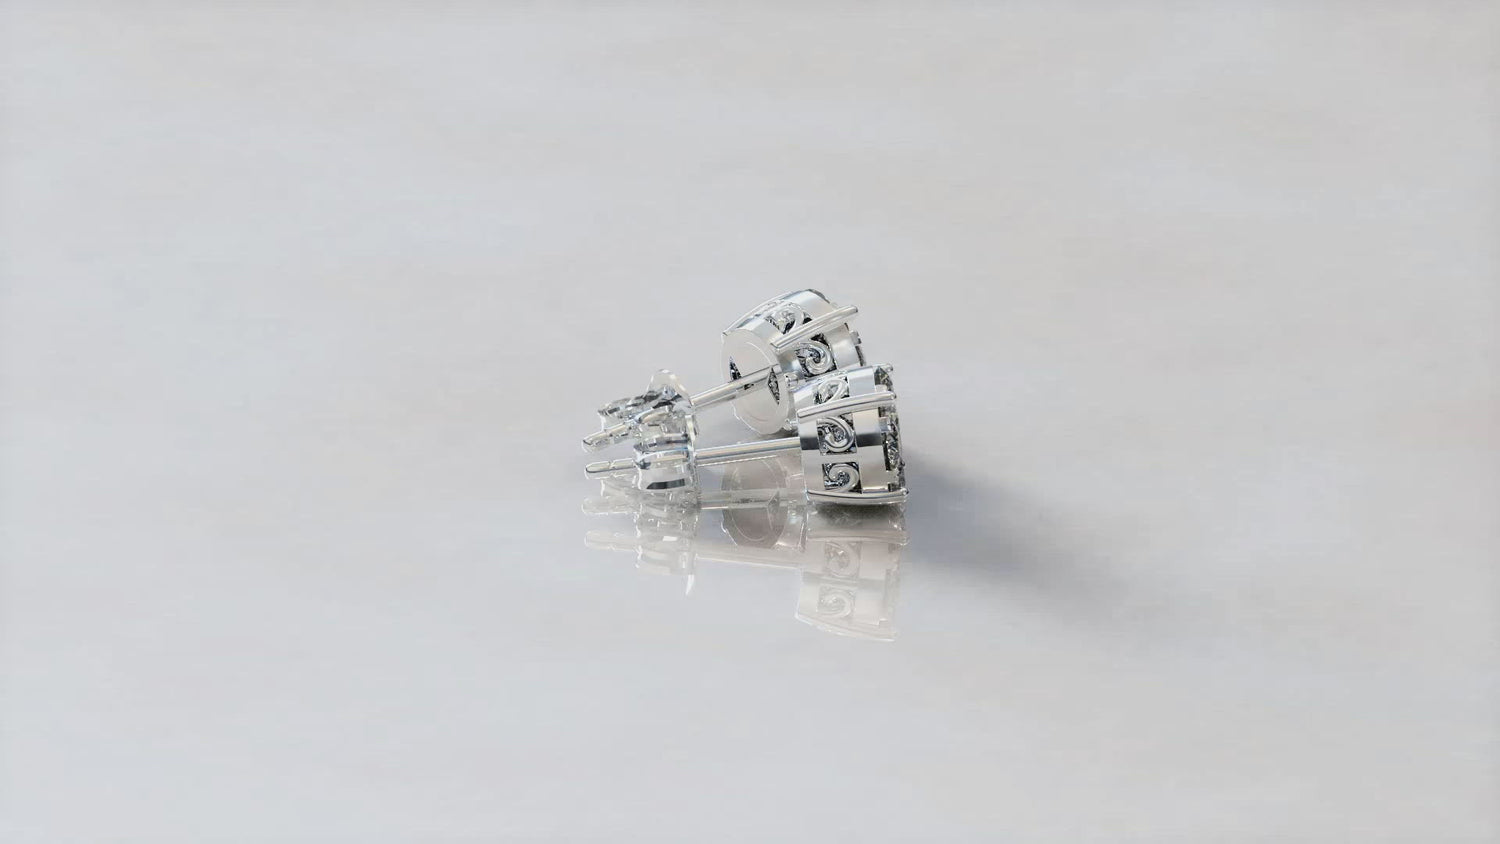 natural diamond affordable studs cheap bestseller earring jewelry